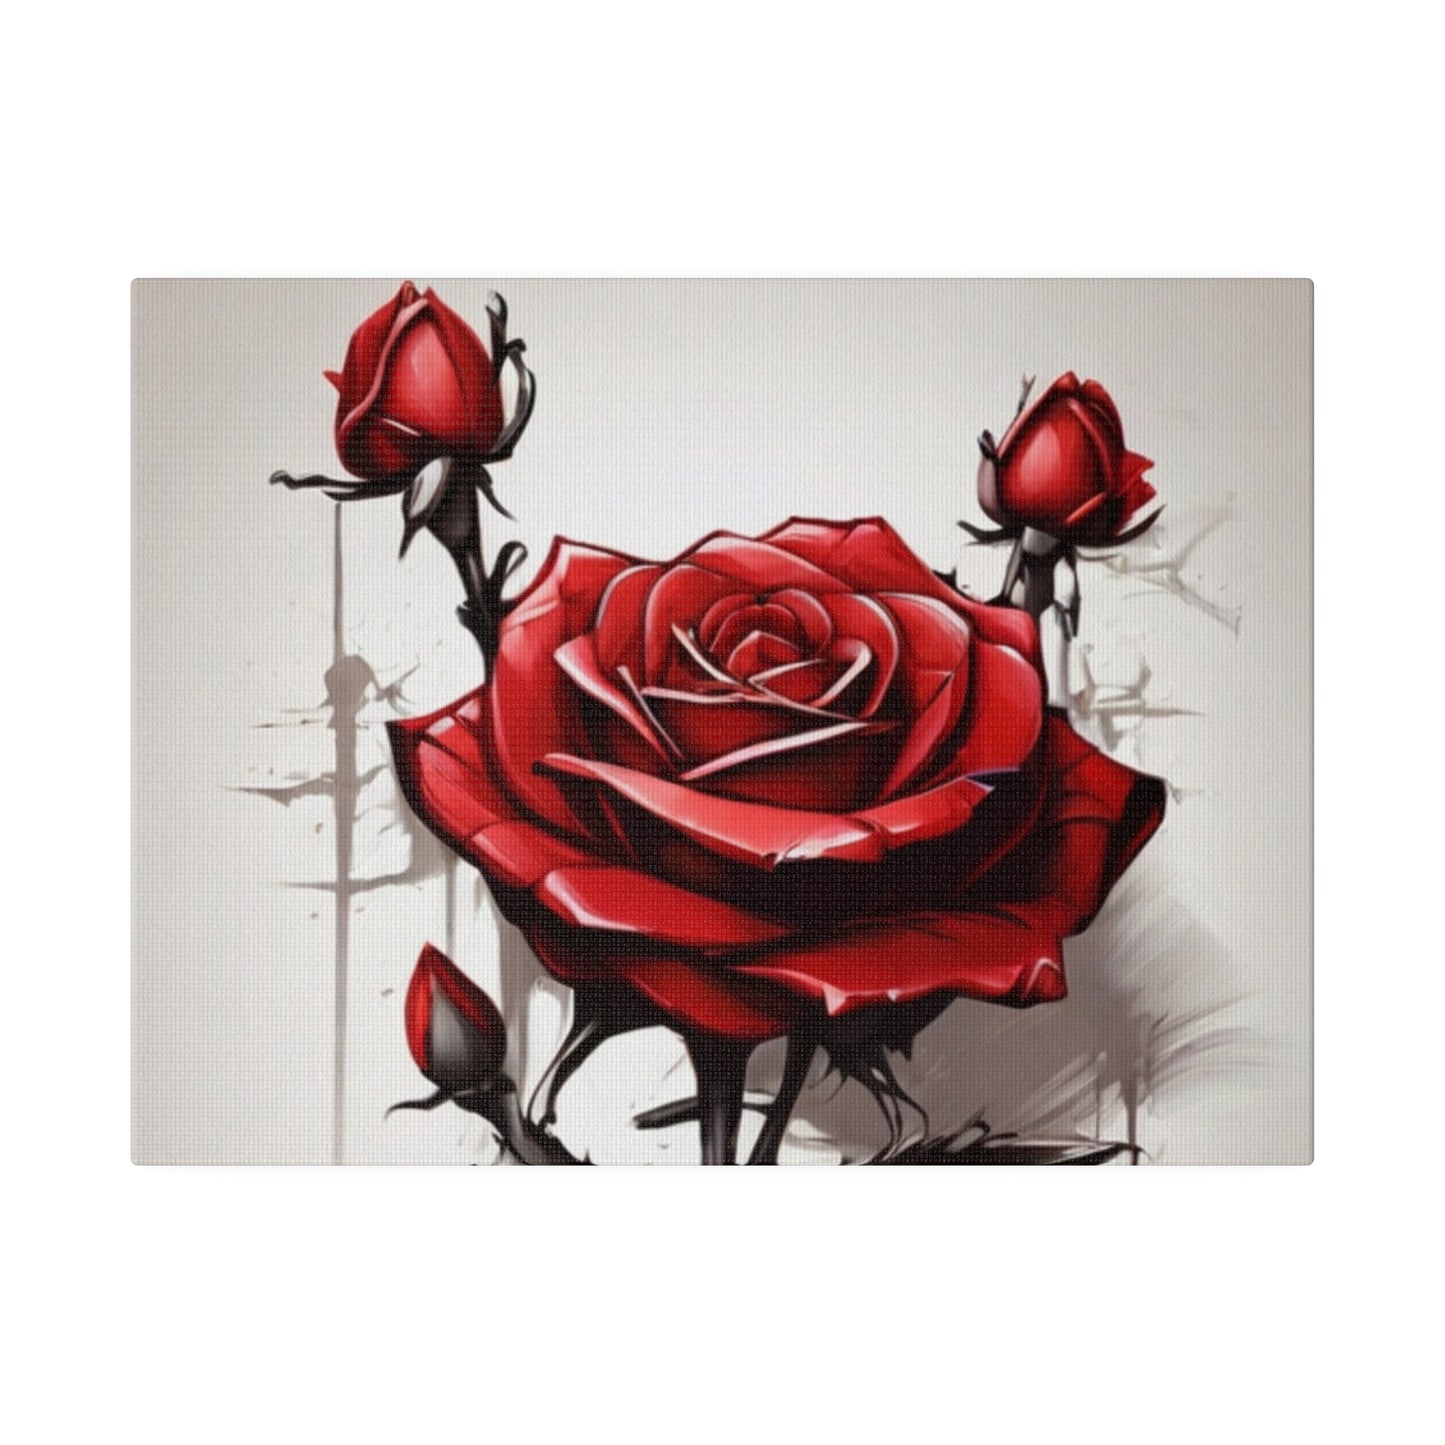 Edgy Red Rose - Matte Canvas, Stretched, 0.75"